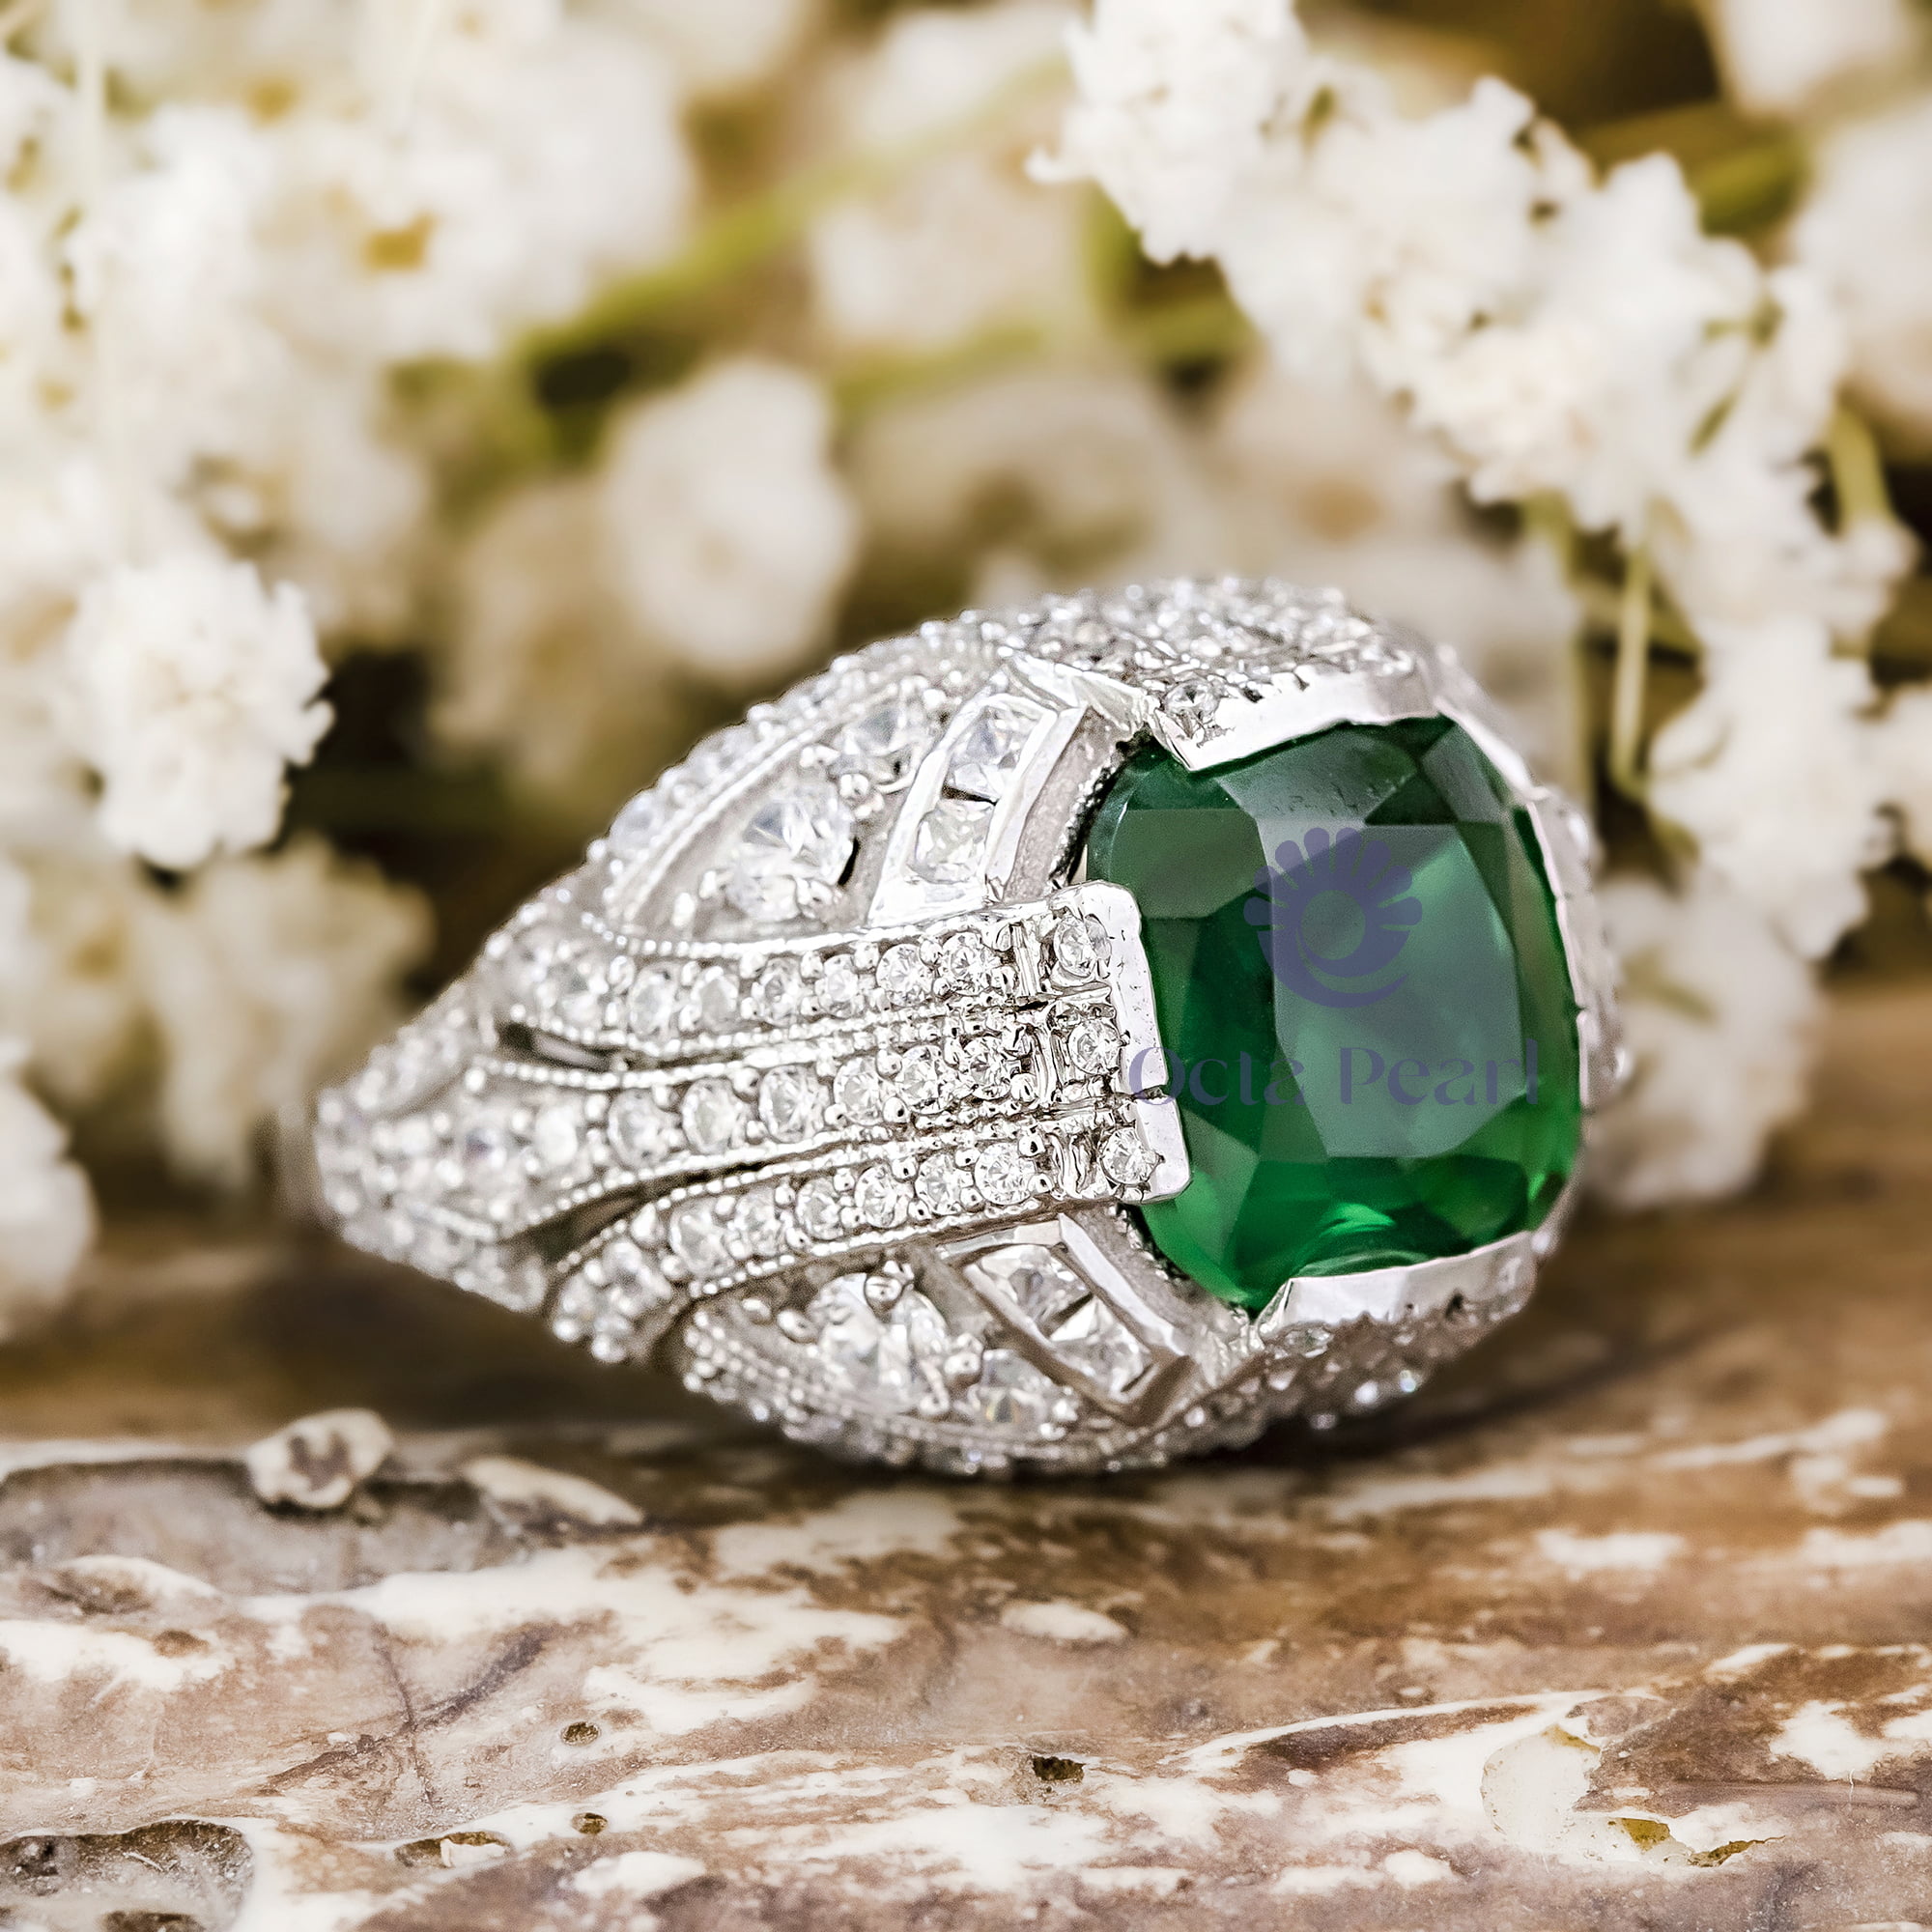 History of Art Deco, Victorian, and Edwardian Era rings: